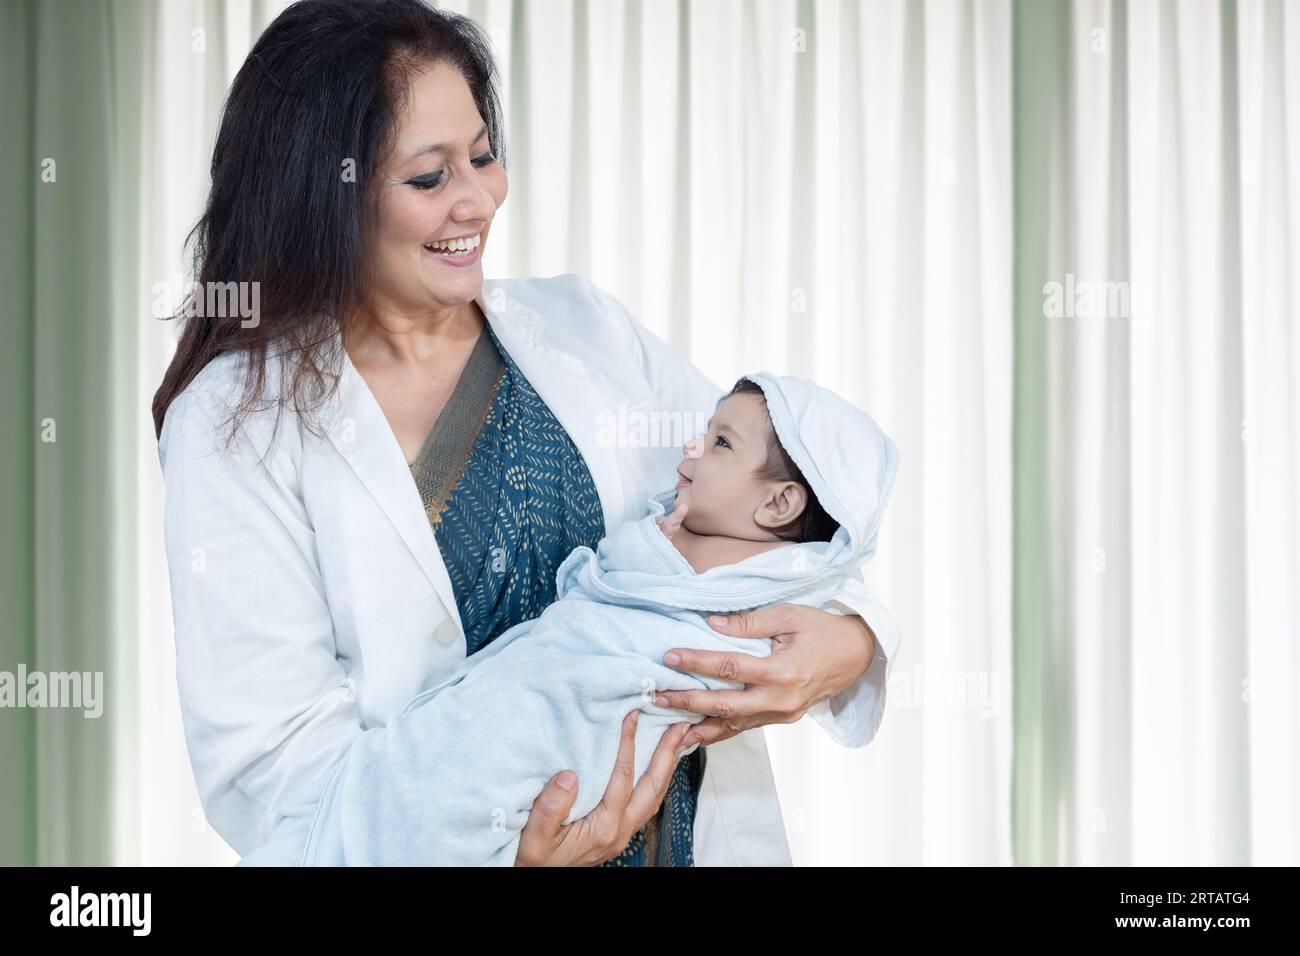 Young indian female doctor or nurse holding newborn baby wrapped in blanket. Portrait of medical worker with infant kid in hospital ward. Stock Photo